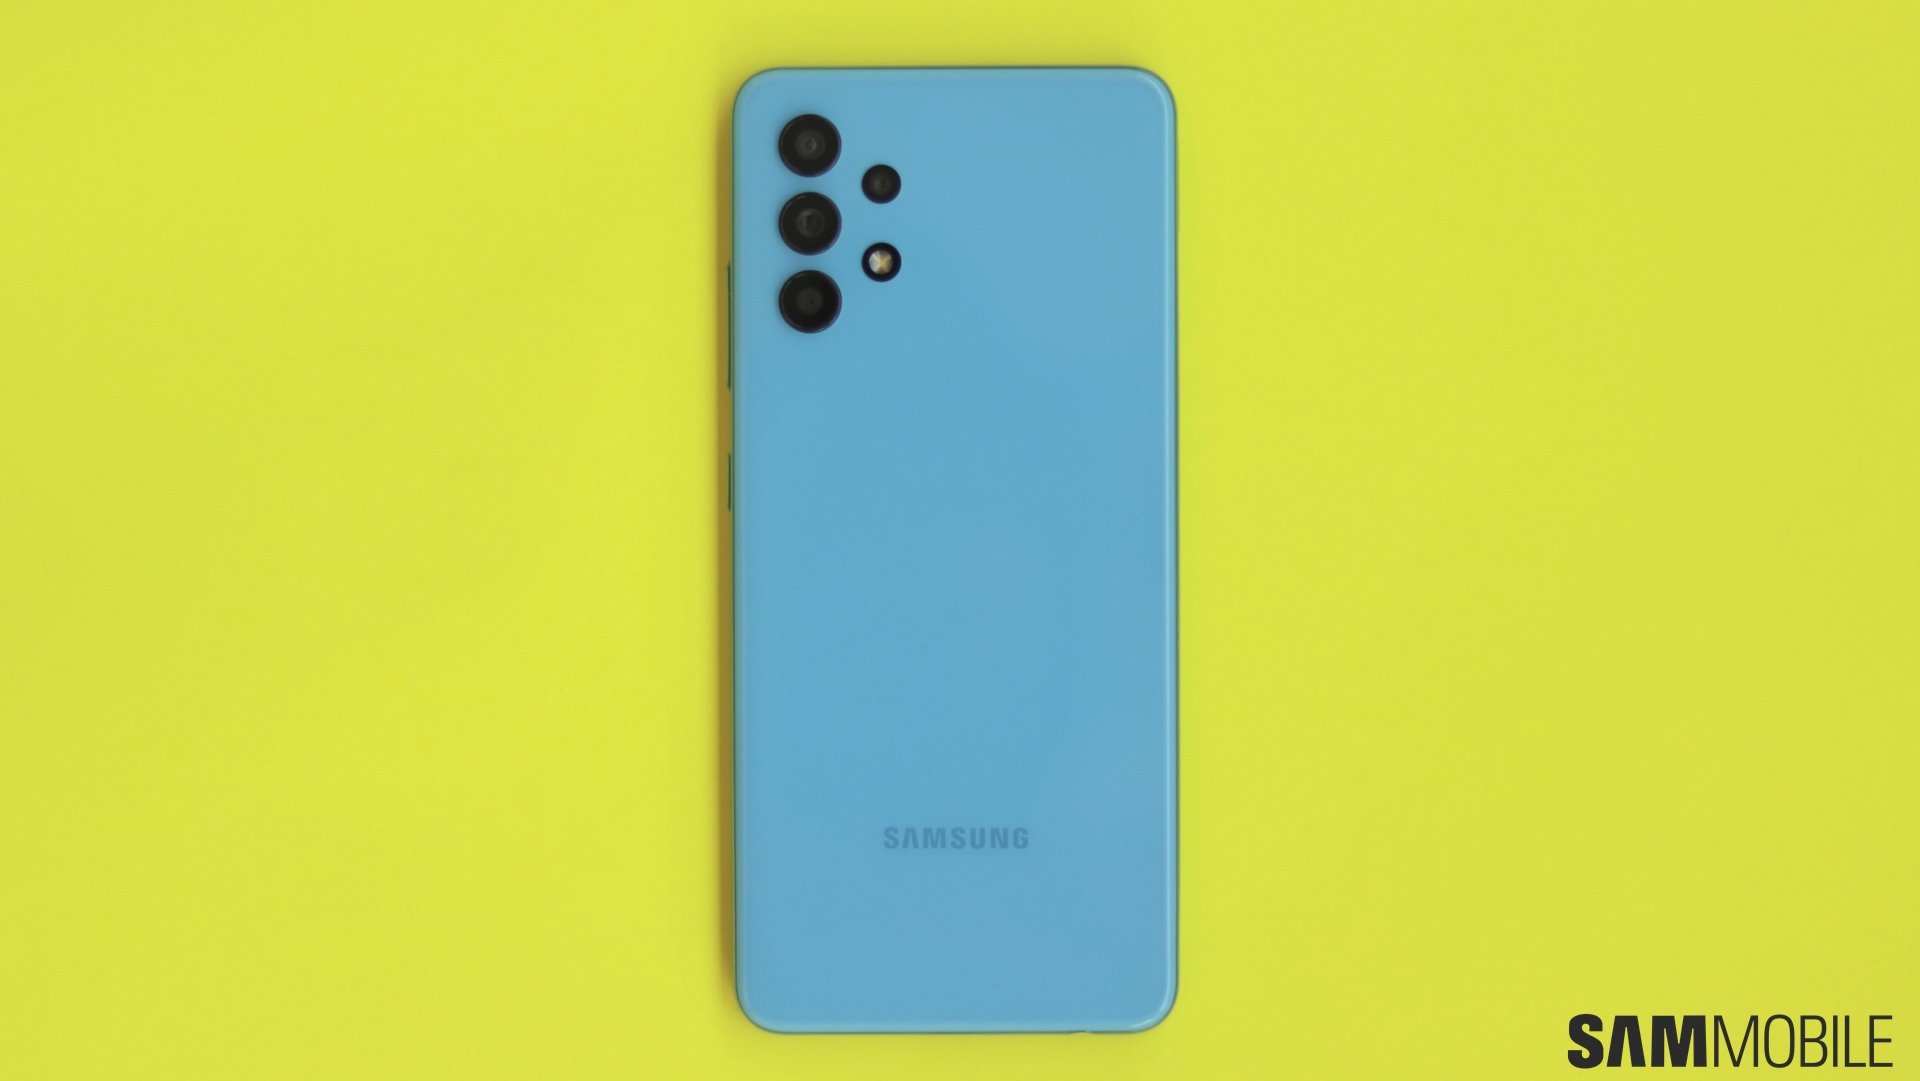 Samsung Galaxy A32 review: A little too slow for 2021 - SamMobile